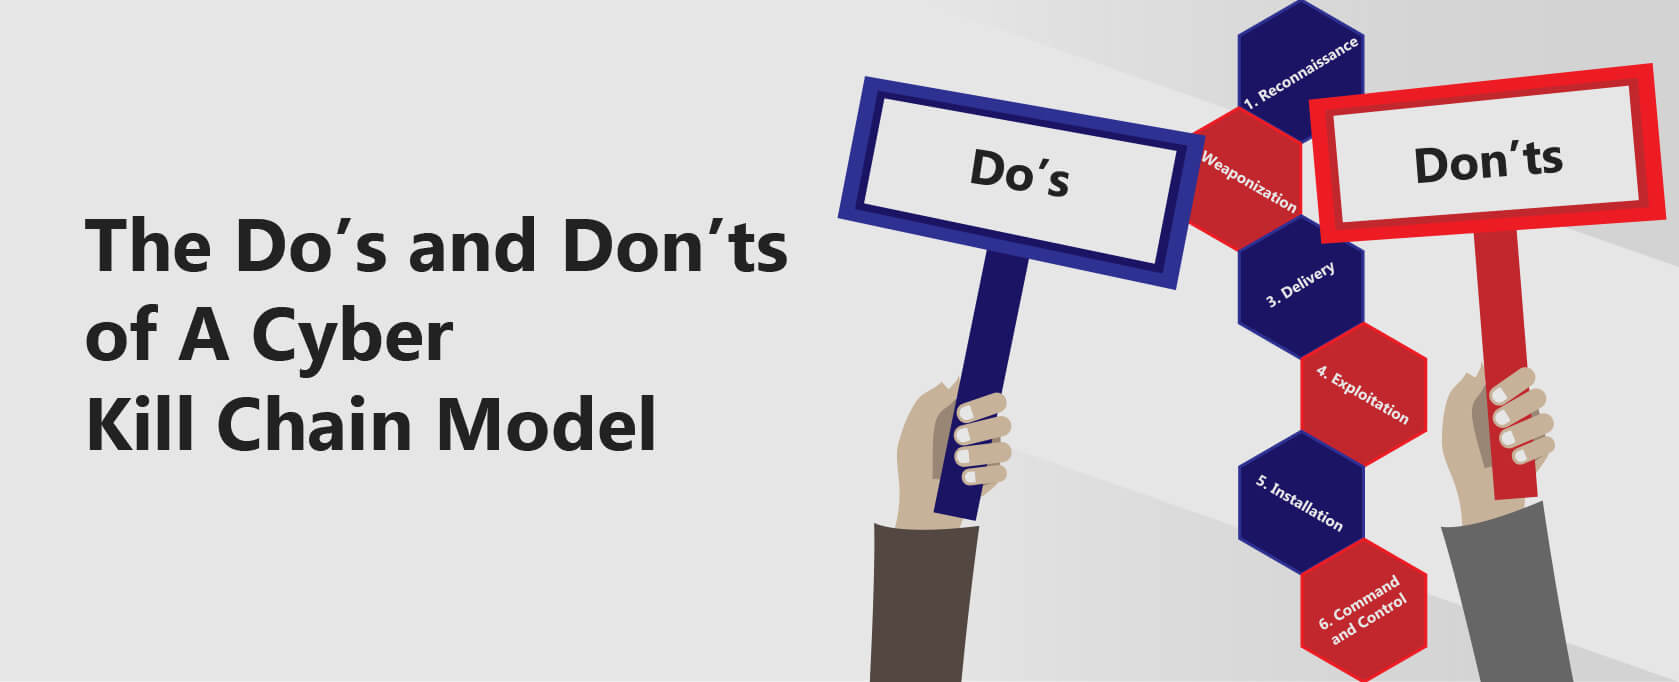 The Do's and Don'ts of A Cyber Kill Chain Model